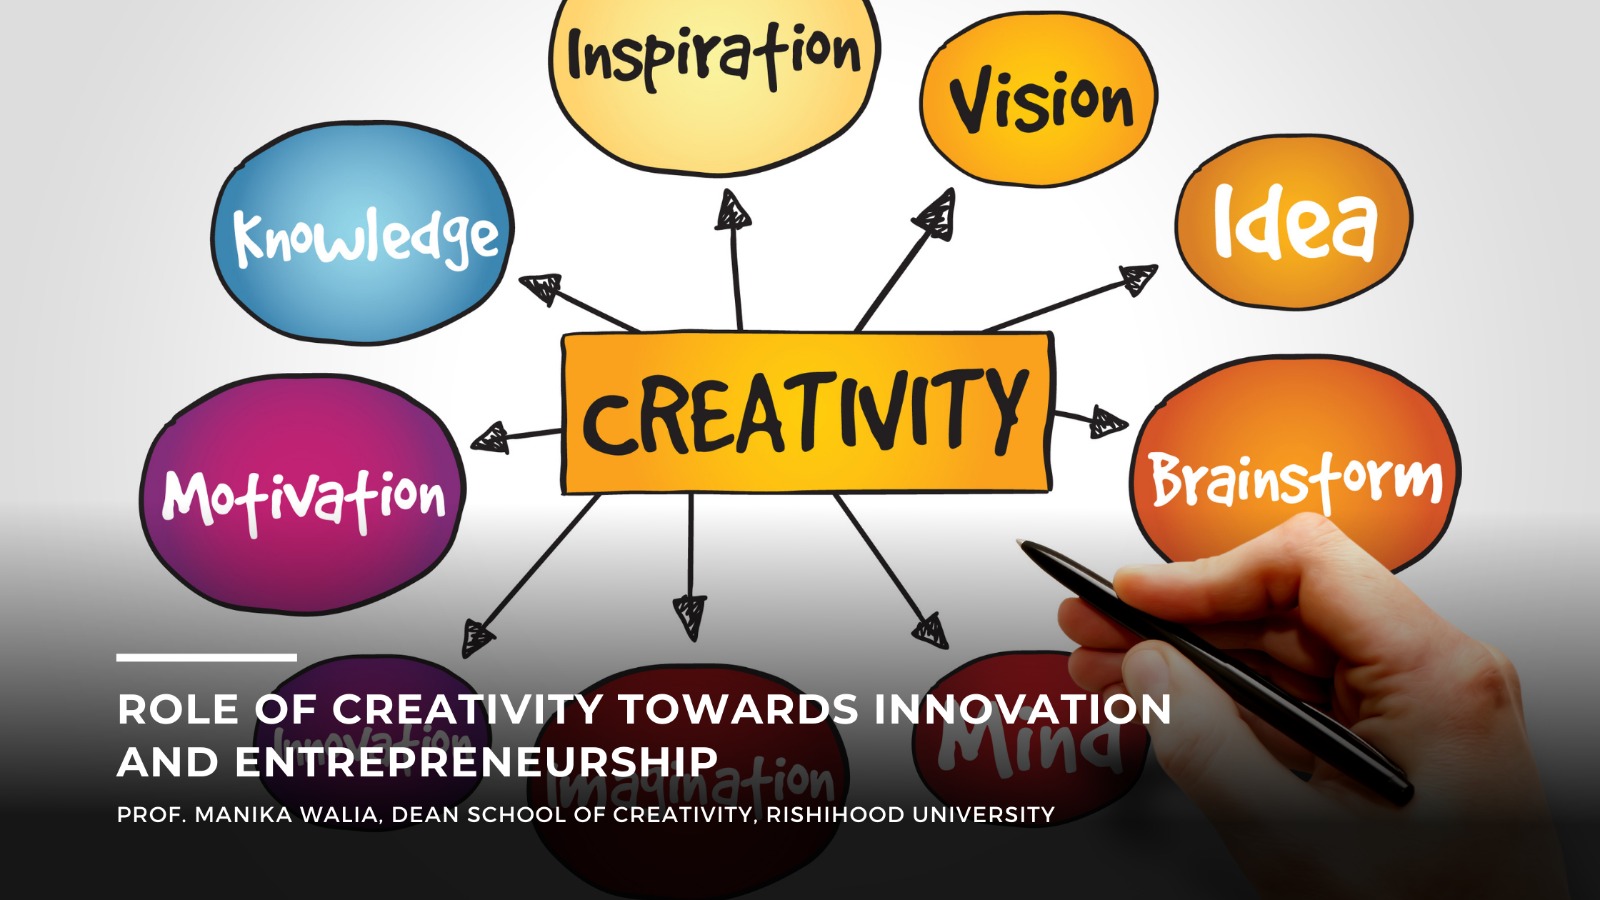  A chart shows the role of creativity in the innovation and entrepreneurship process.